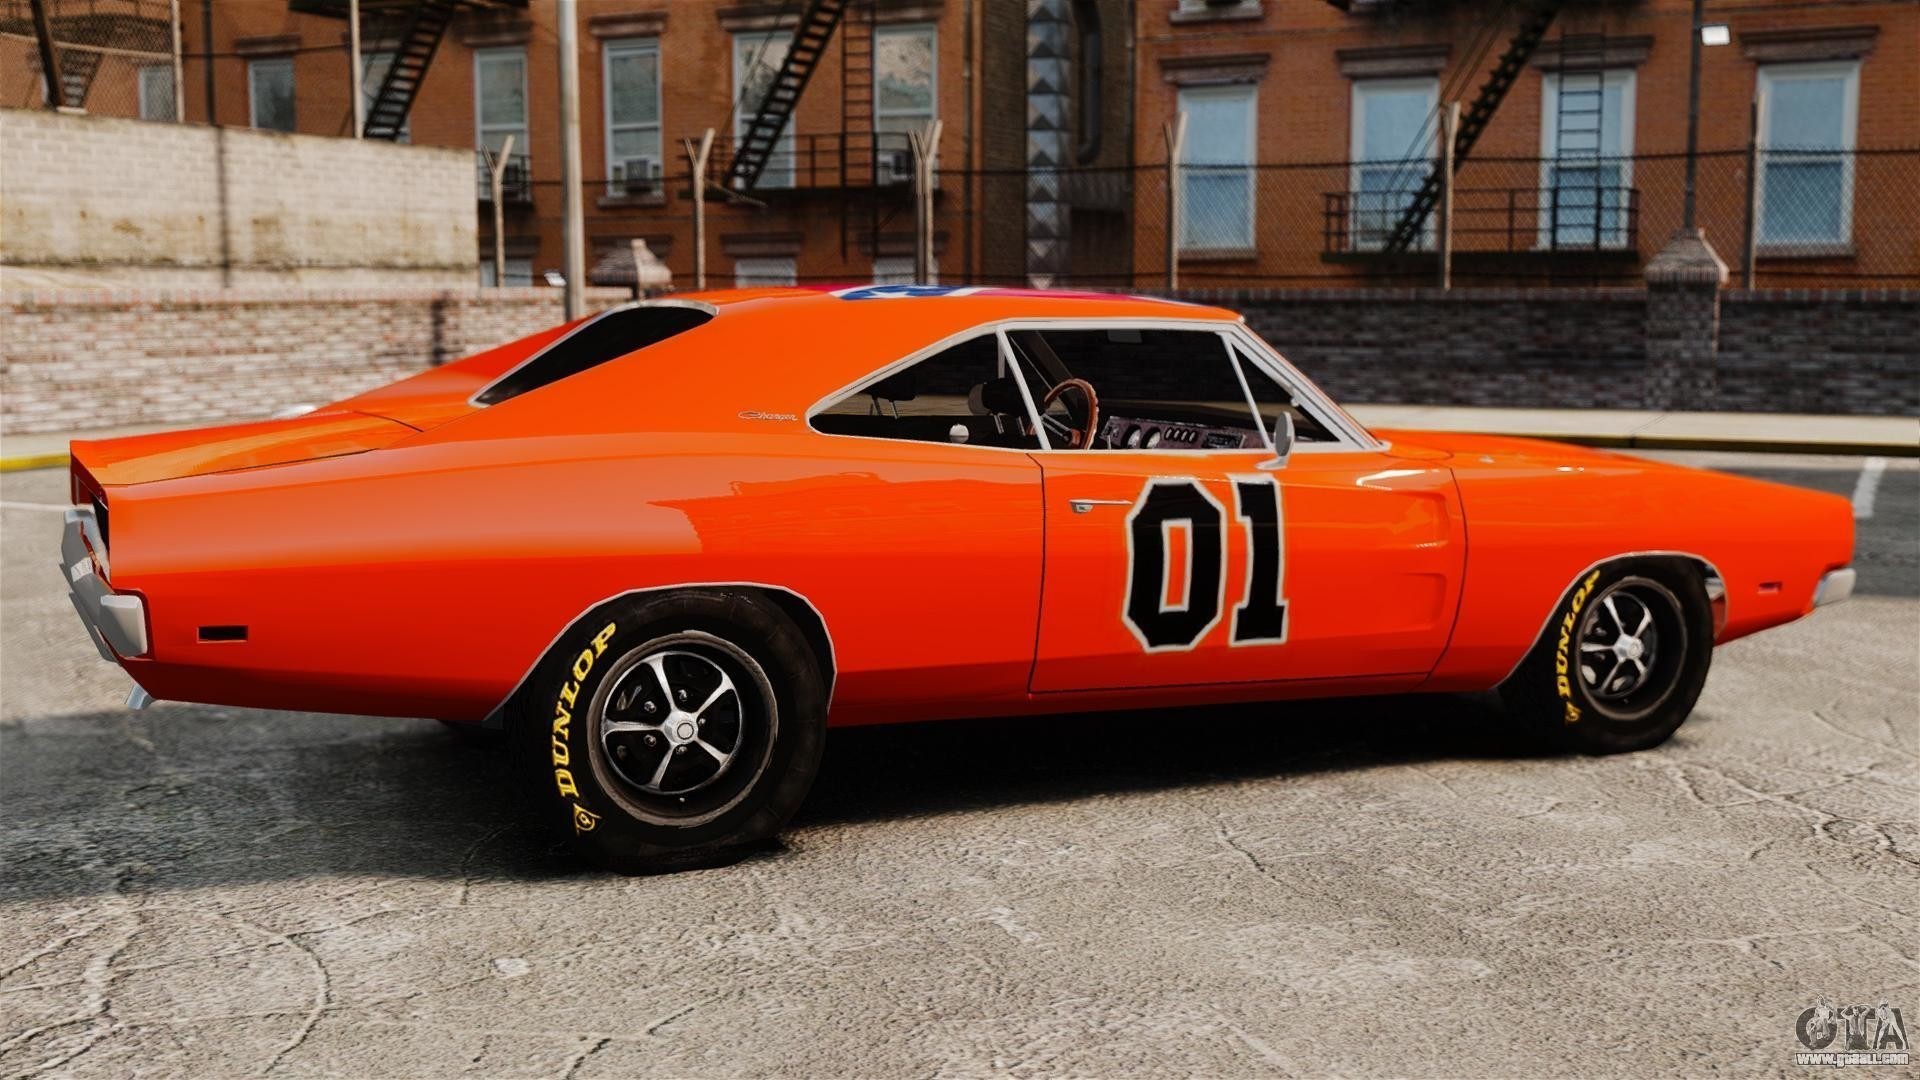 1920x1080 General lee wallpaper images dodge charger cityconnectapps jpg   Dukes of hazzard general lee wallpaper